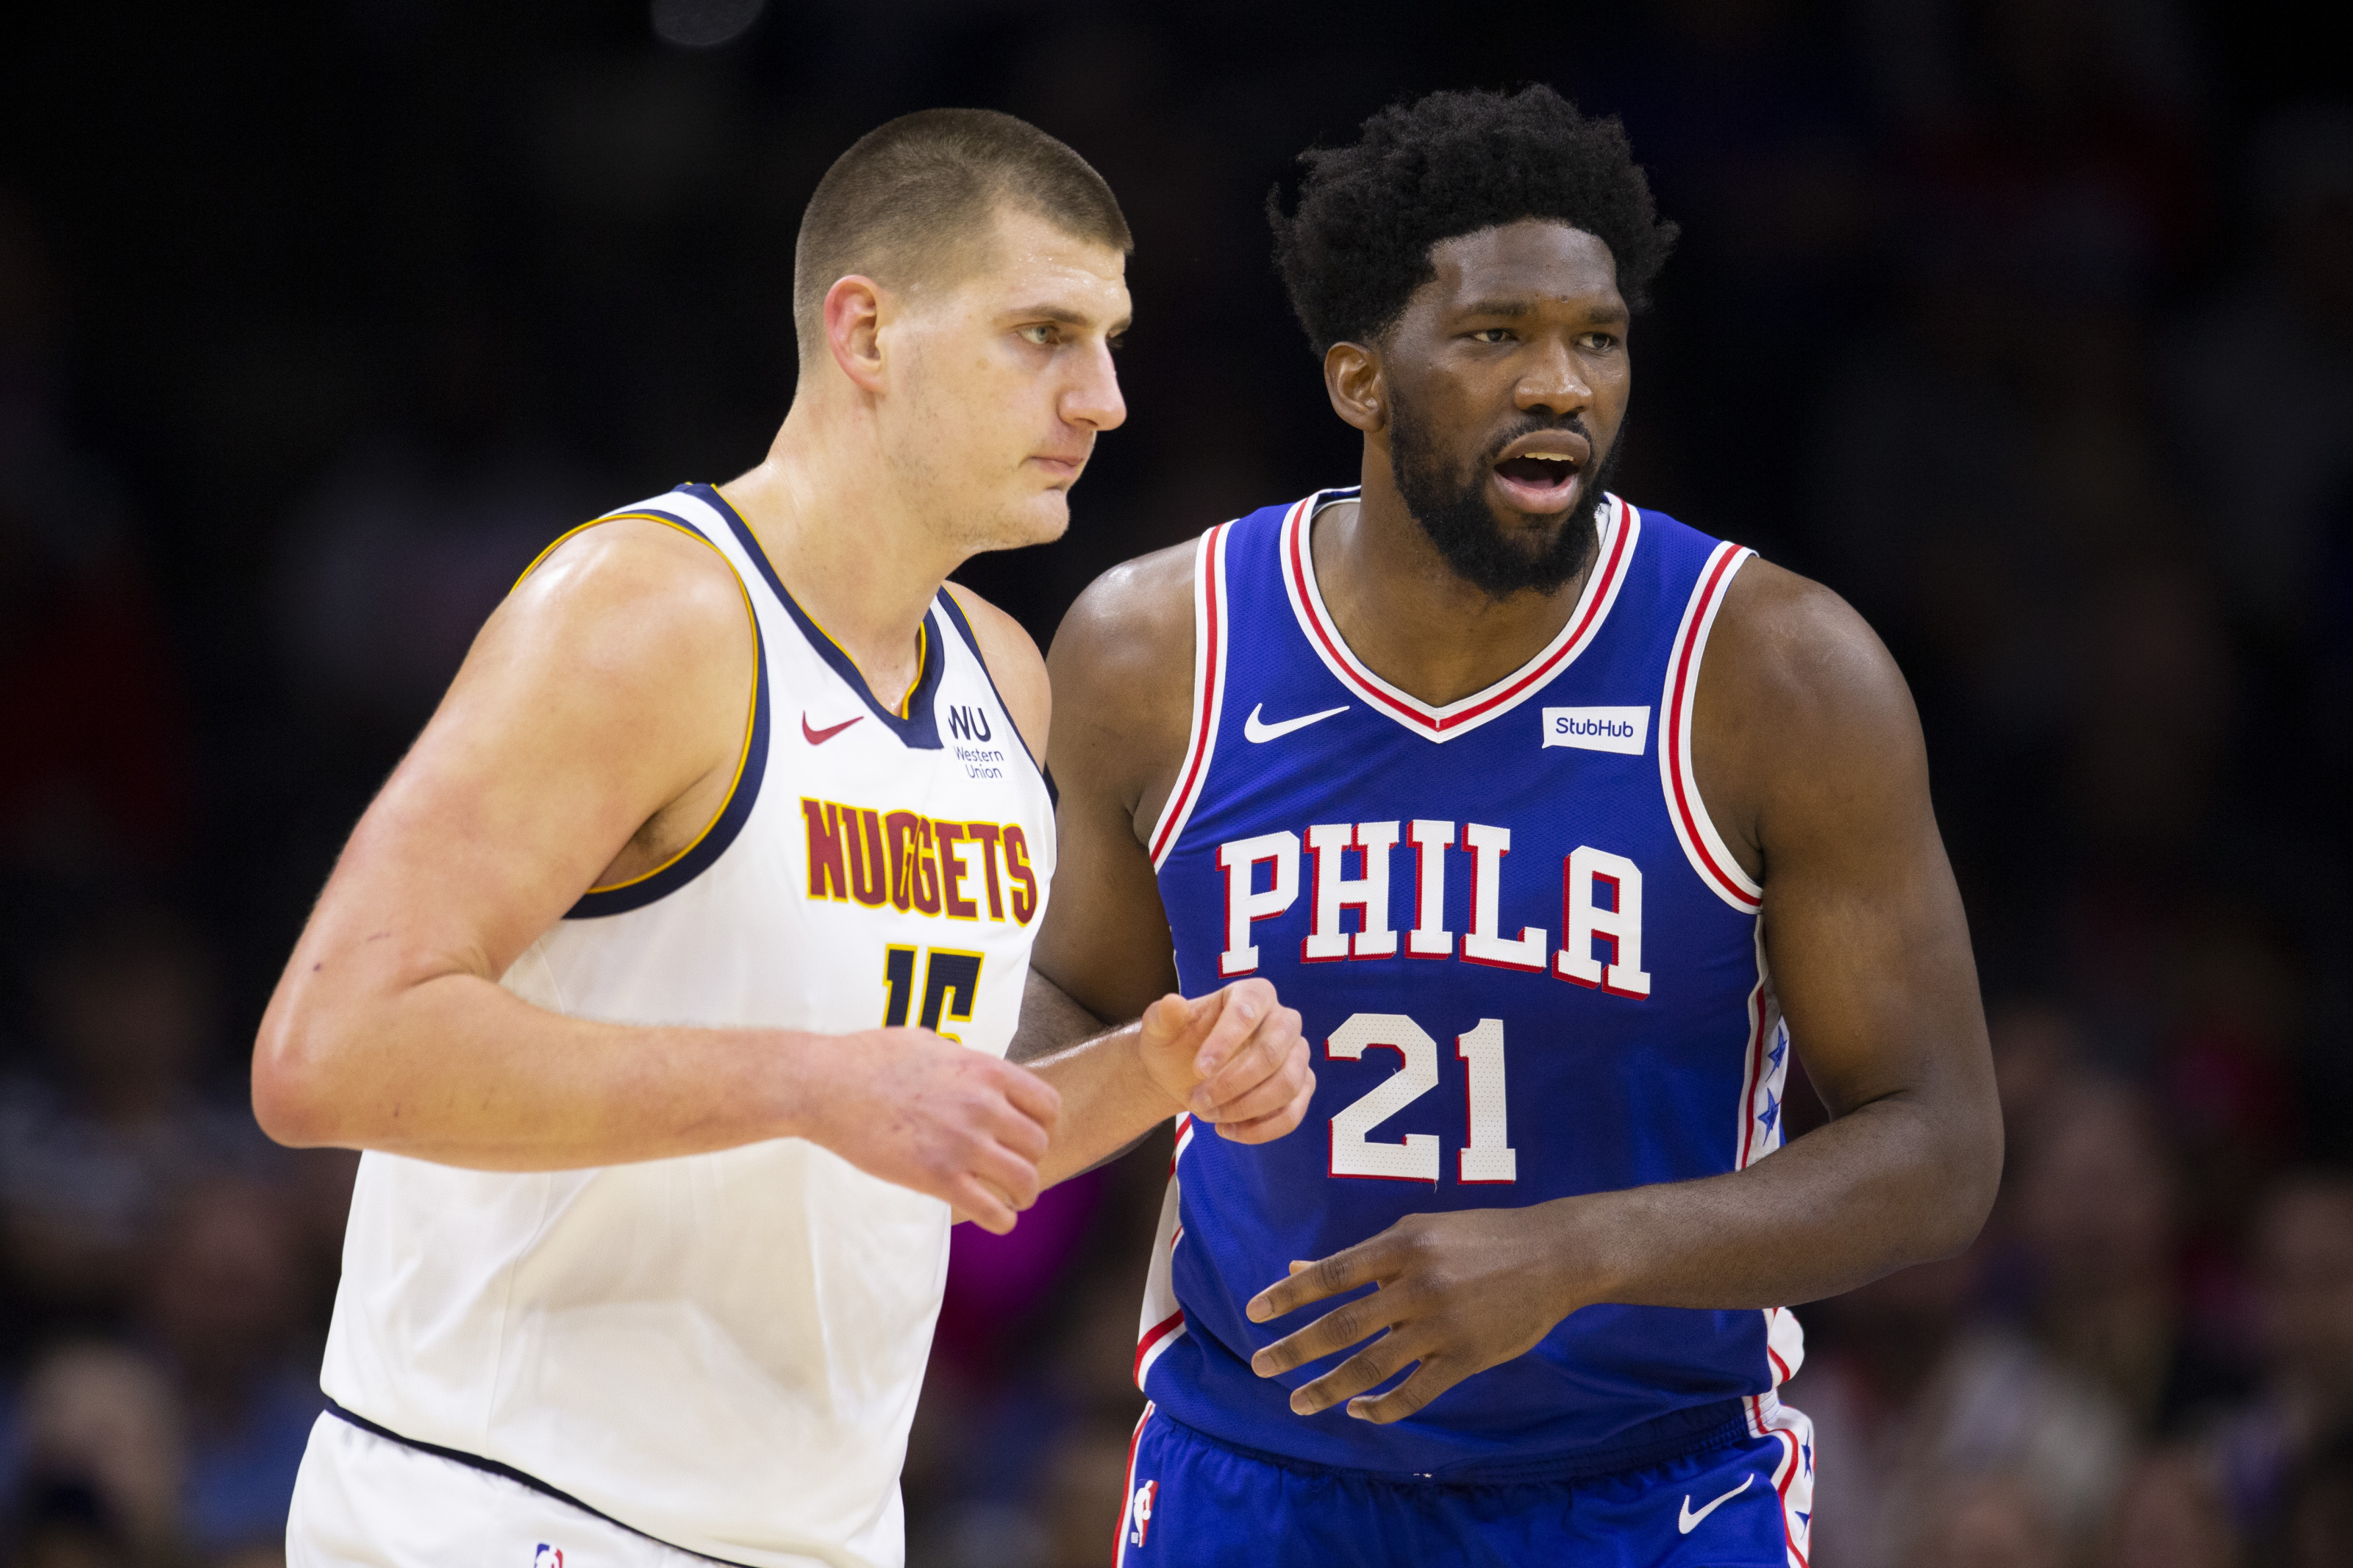 Ranking the top 100 NBA players for the 2020-21 season